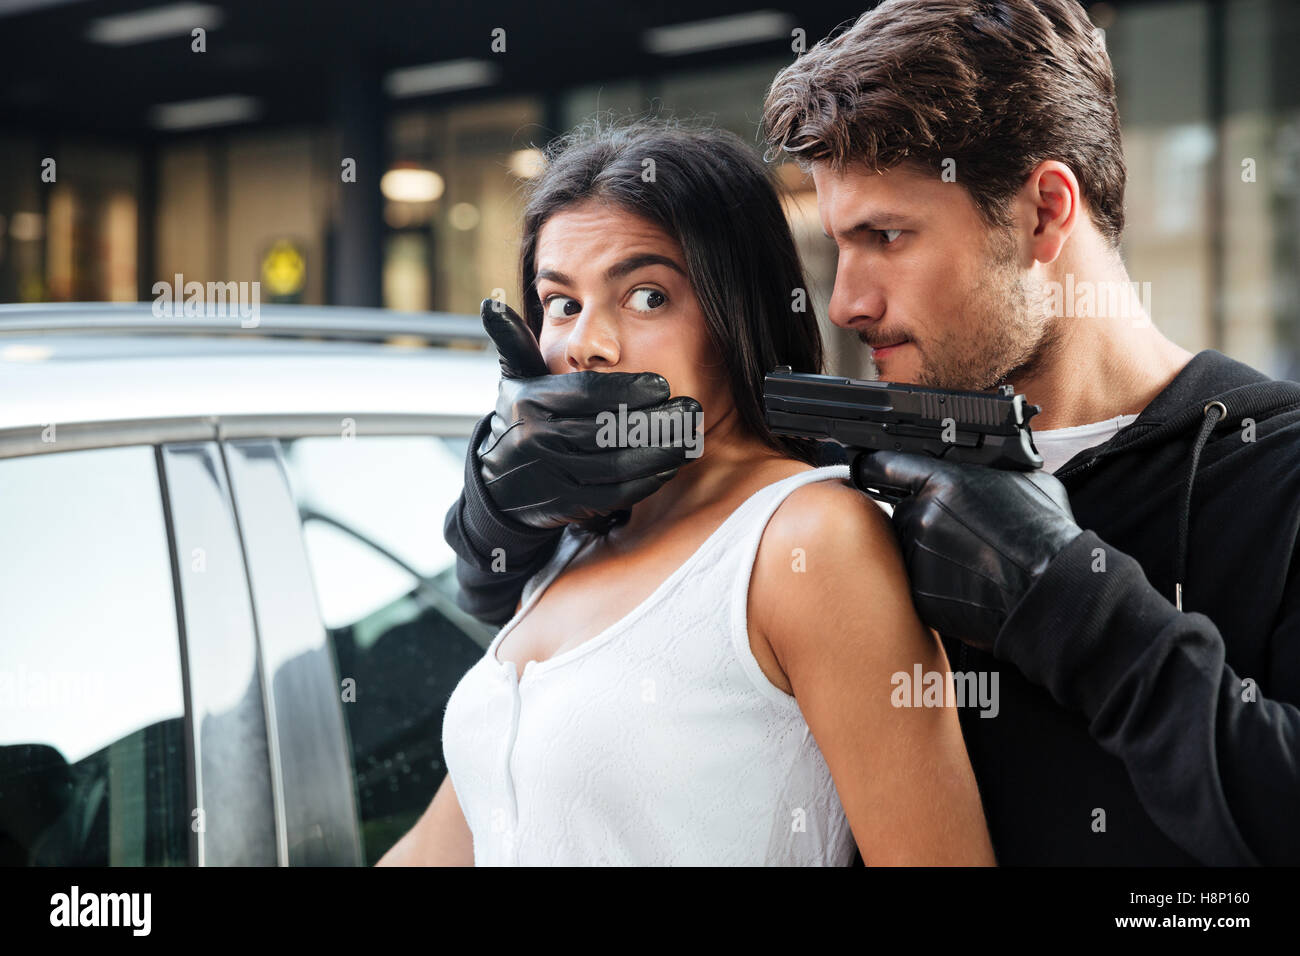 https://c8.alamy.com/comp/H8P160/dangerous-young-man-robber-in-gloves-covered-mouth-of-woman-and-threatening-H8P160.jpg